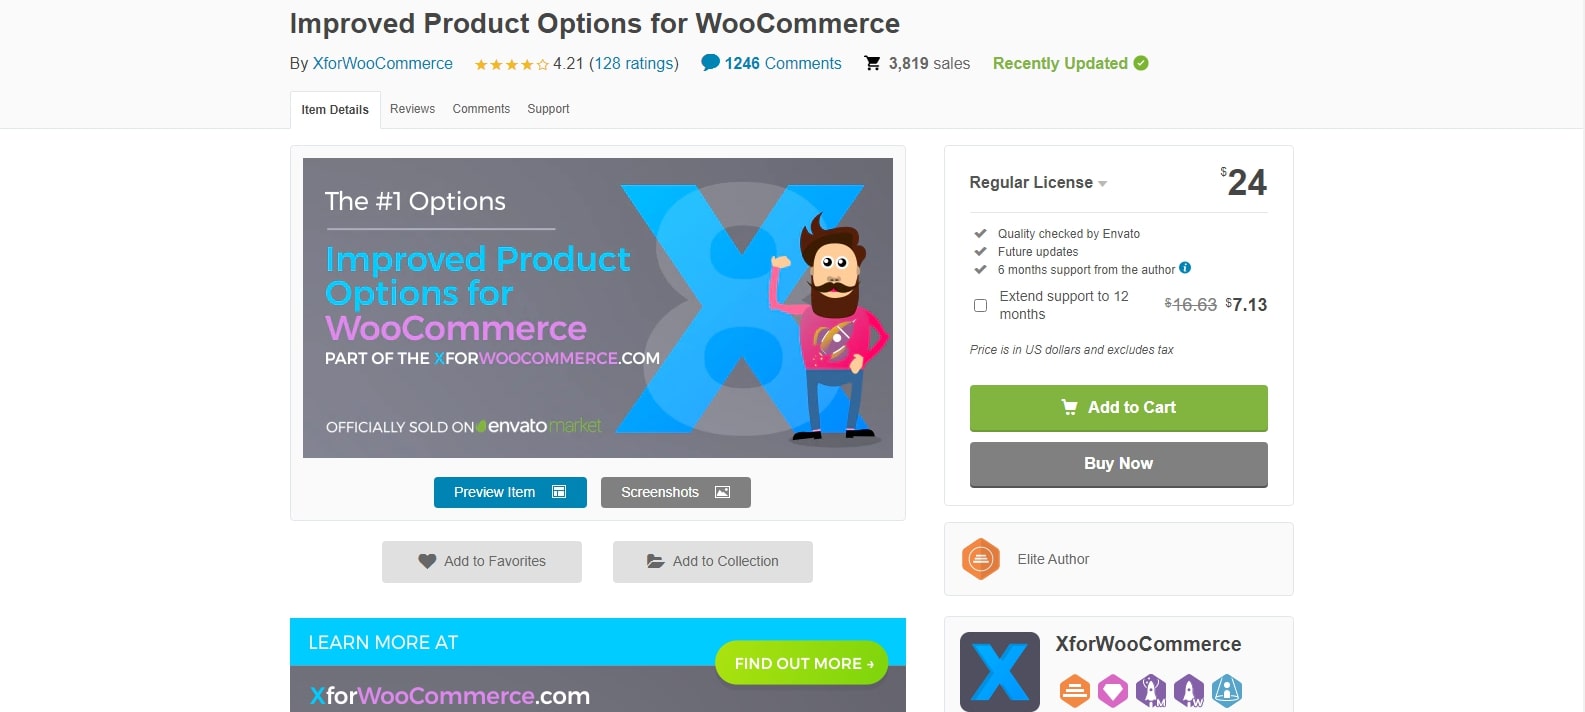 Improved Product Options for WooCommerce